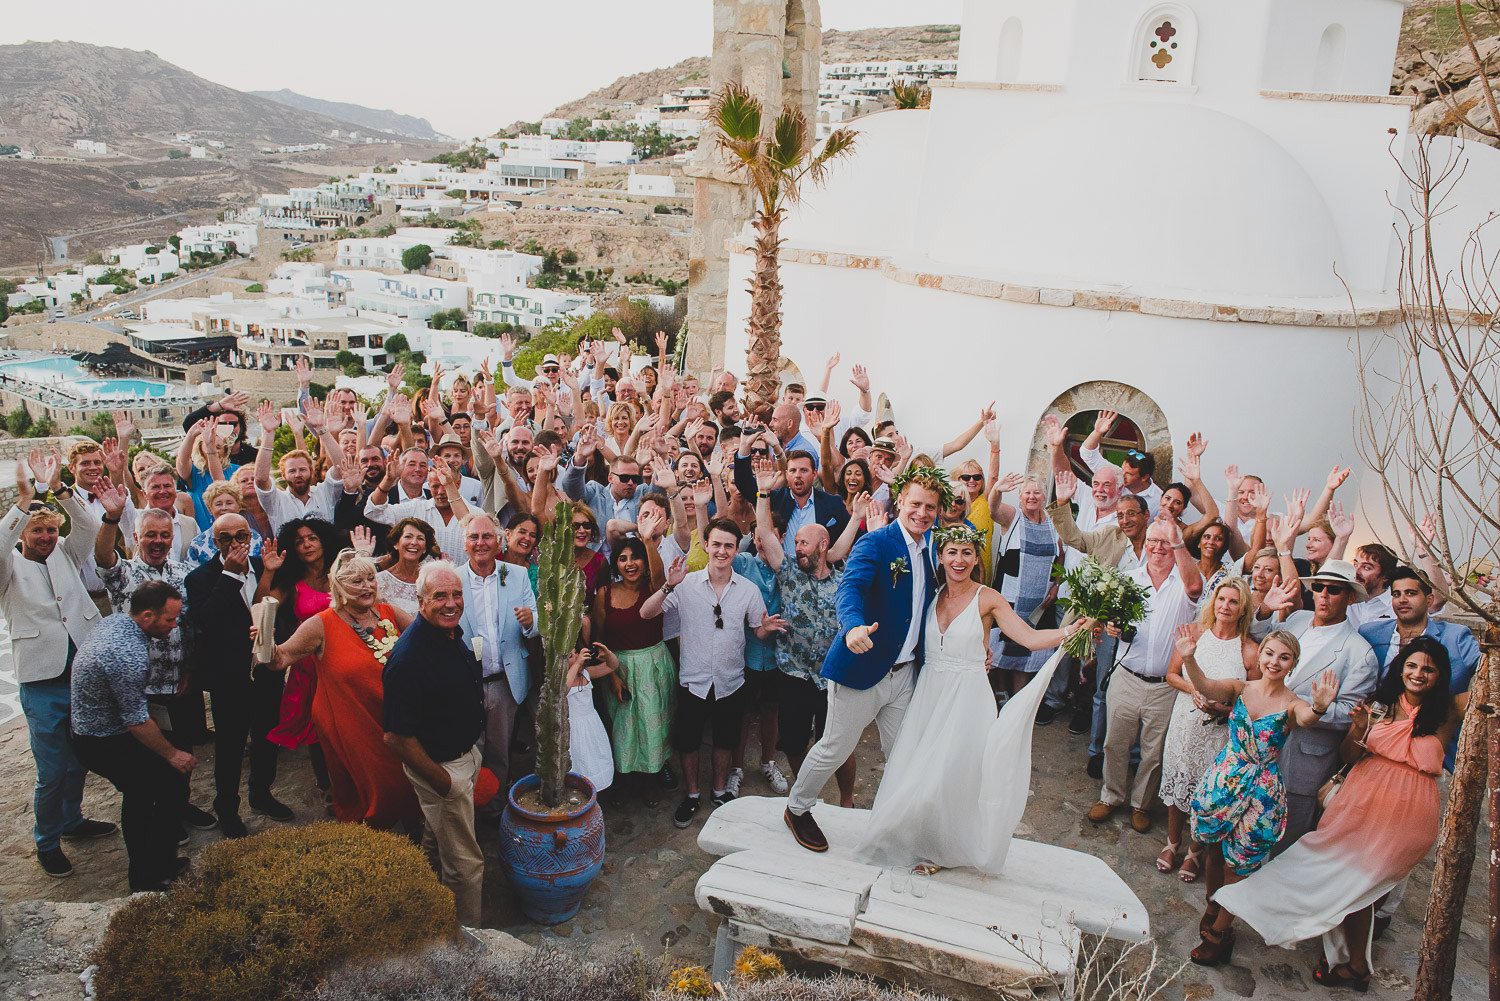 Wedding photographer Mykonos: group photo of wedding party with their hands in the air all smiling group for Mykonos wedding.